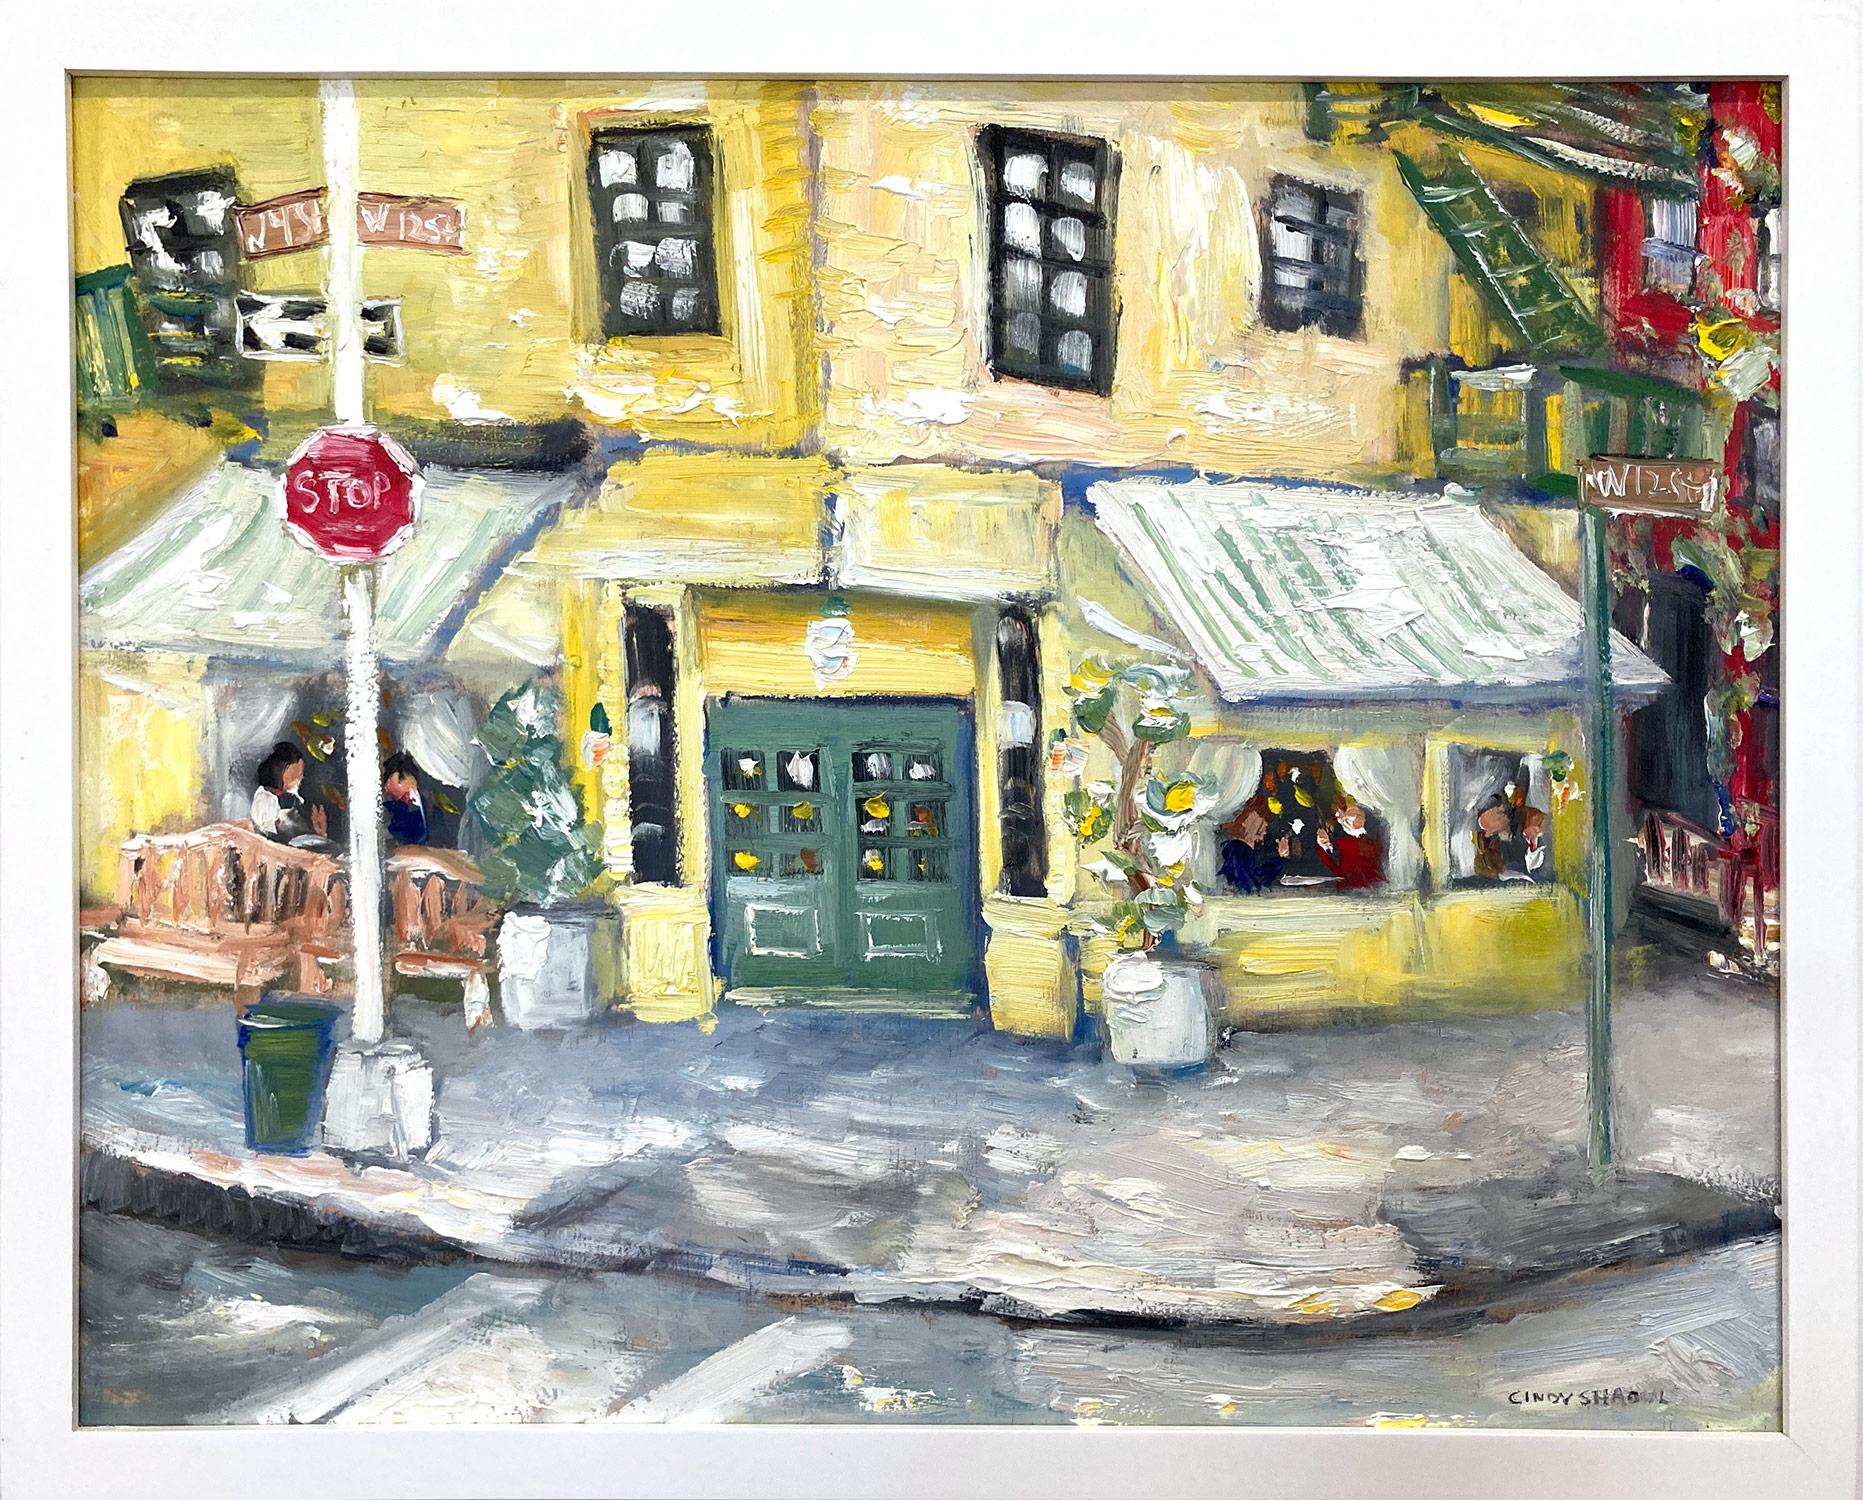 Cindy Shaoul Landscape Painting - "Cafe Cluny" Colorful Impressionistic Restaurant Oil Painting in Soho New York